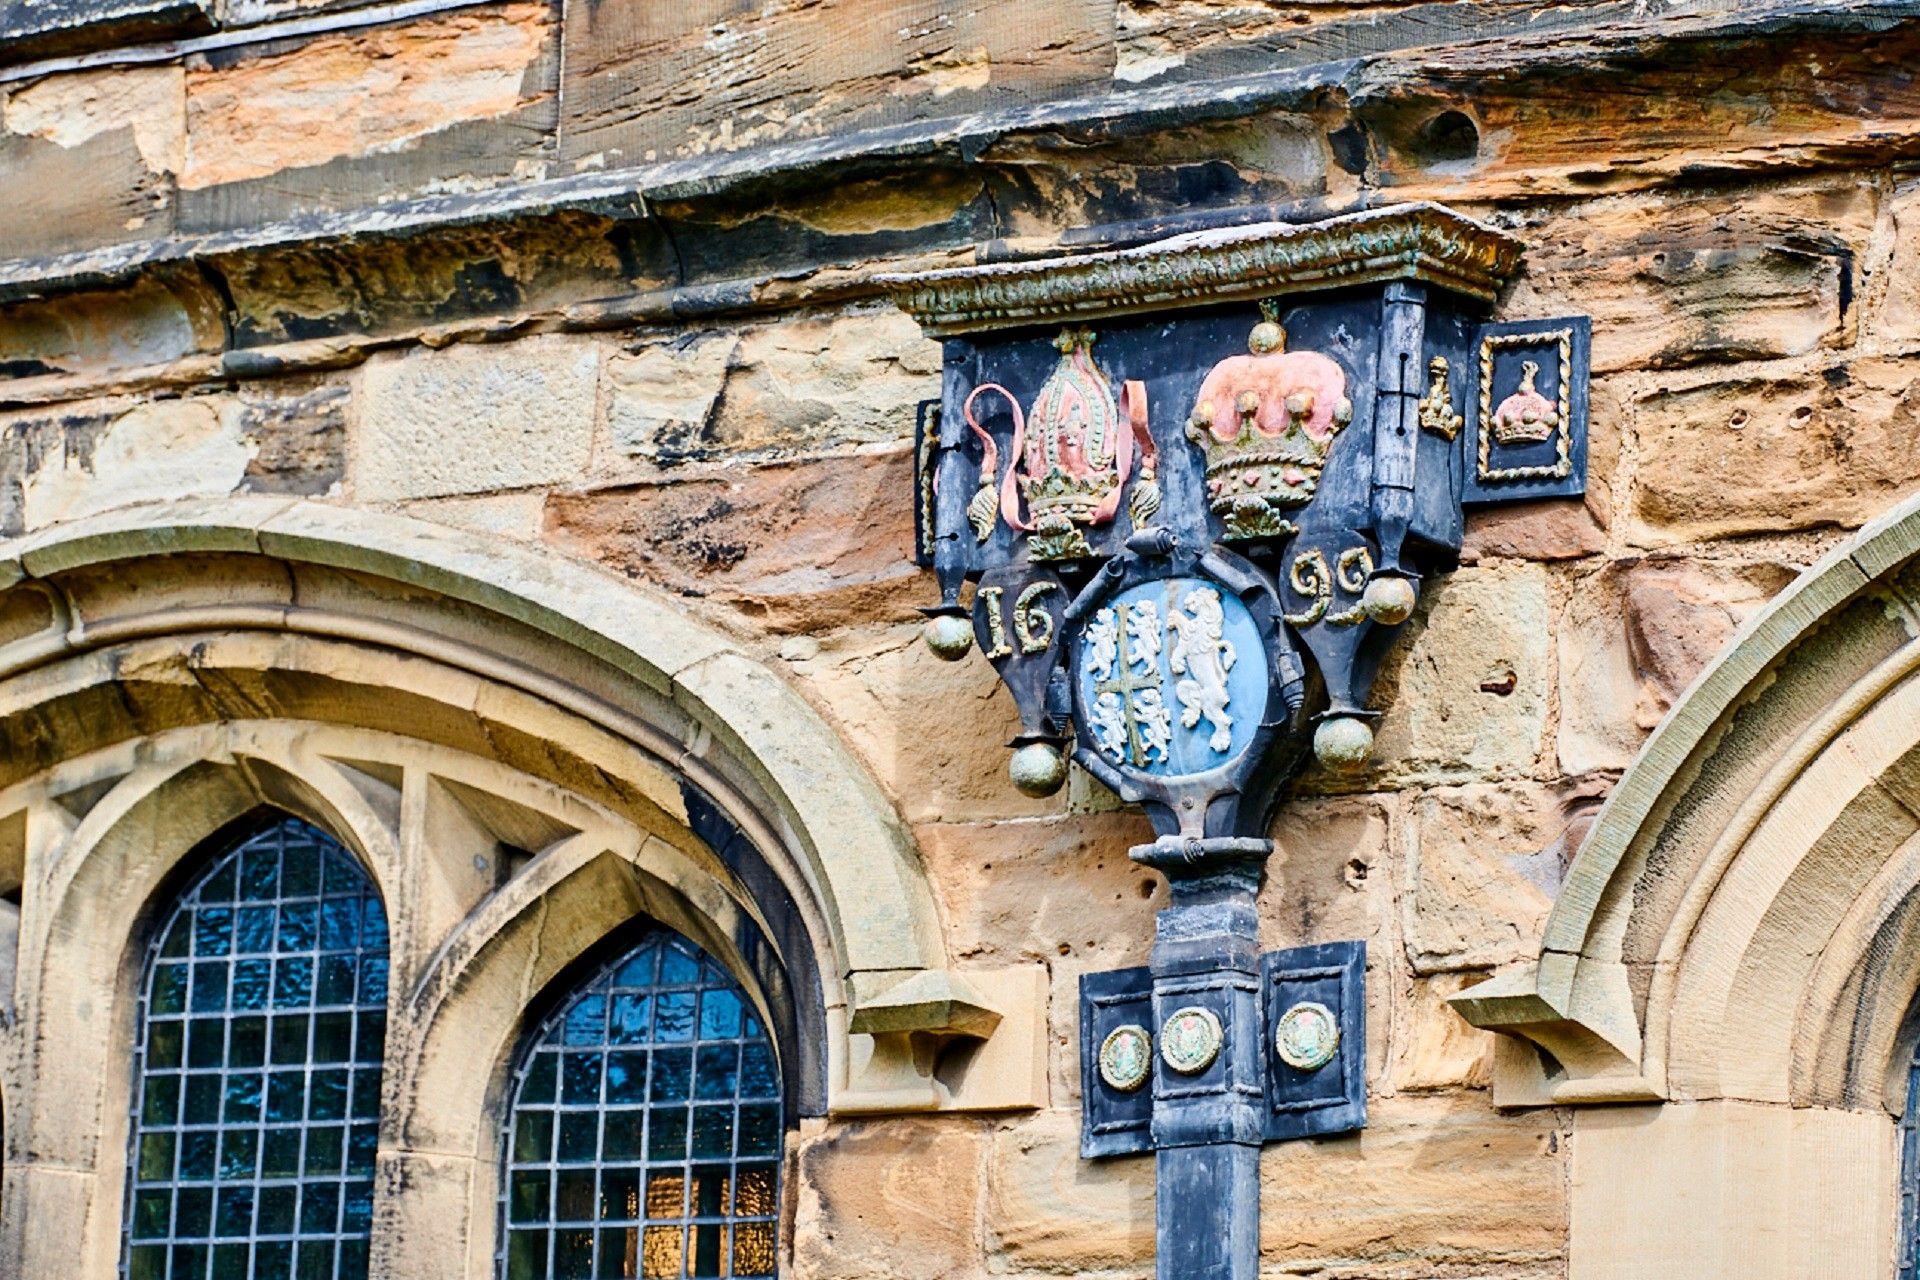 An ornate drainpipe on the Tunstall Chapel. The date 1699 can be seen as well as the coat of arms of the Bishop of Durham.